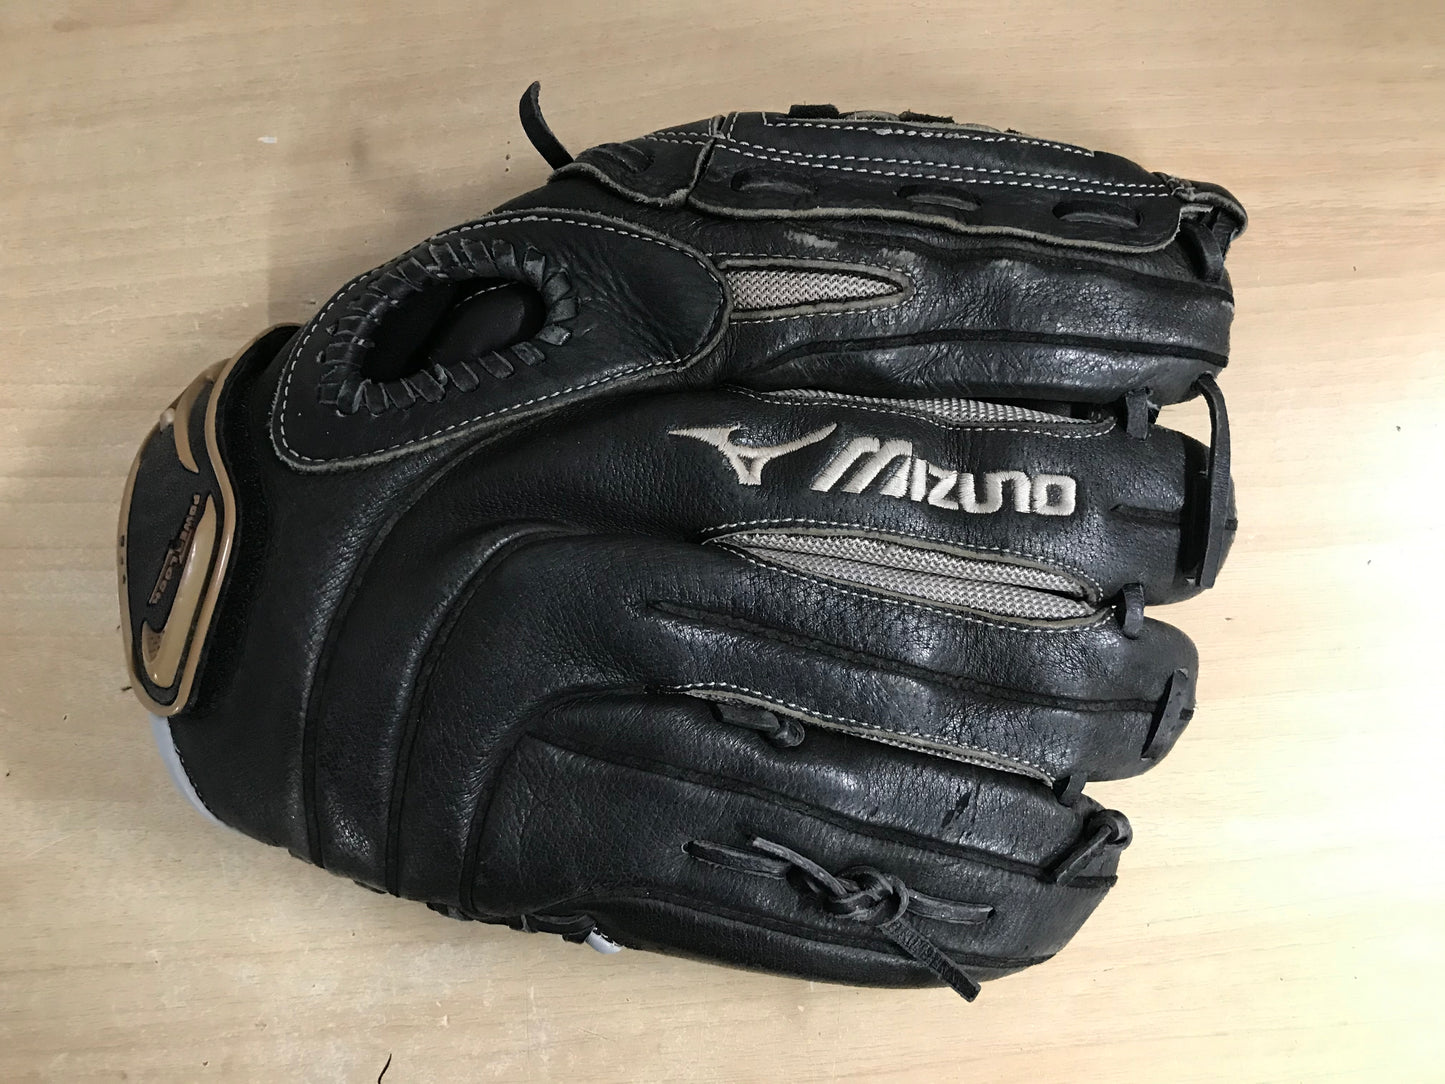 Baseball Glove Adult Size 12.5 inch Mizuno  Leather Black Fits on RIGHT Hand